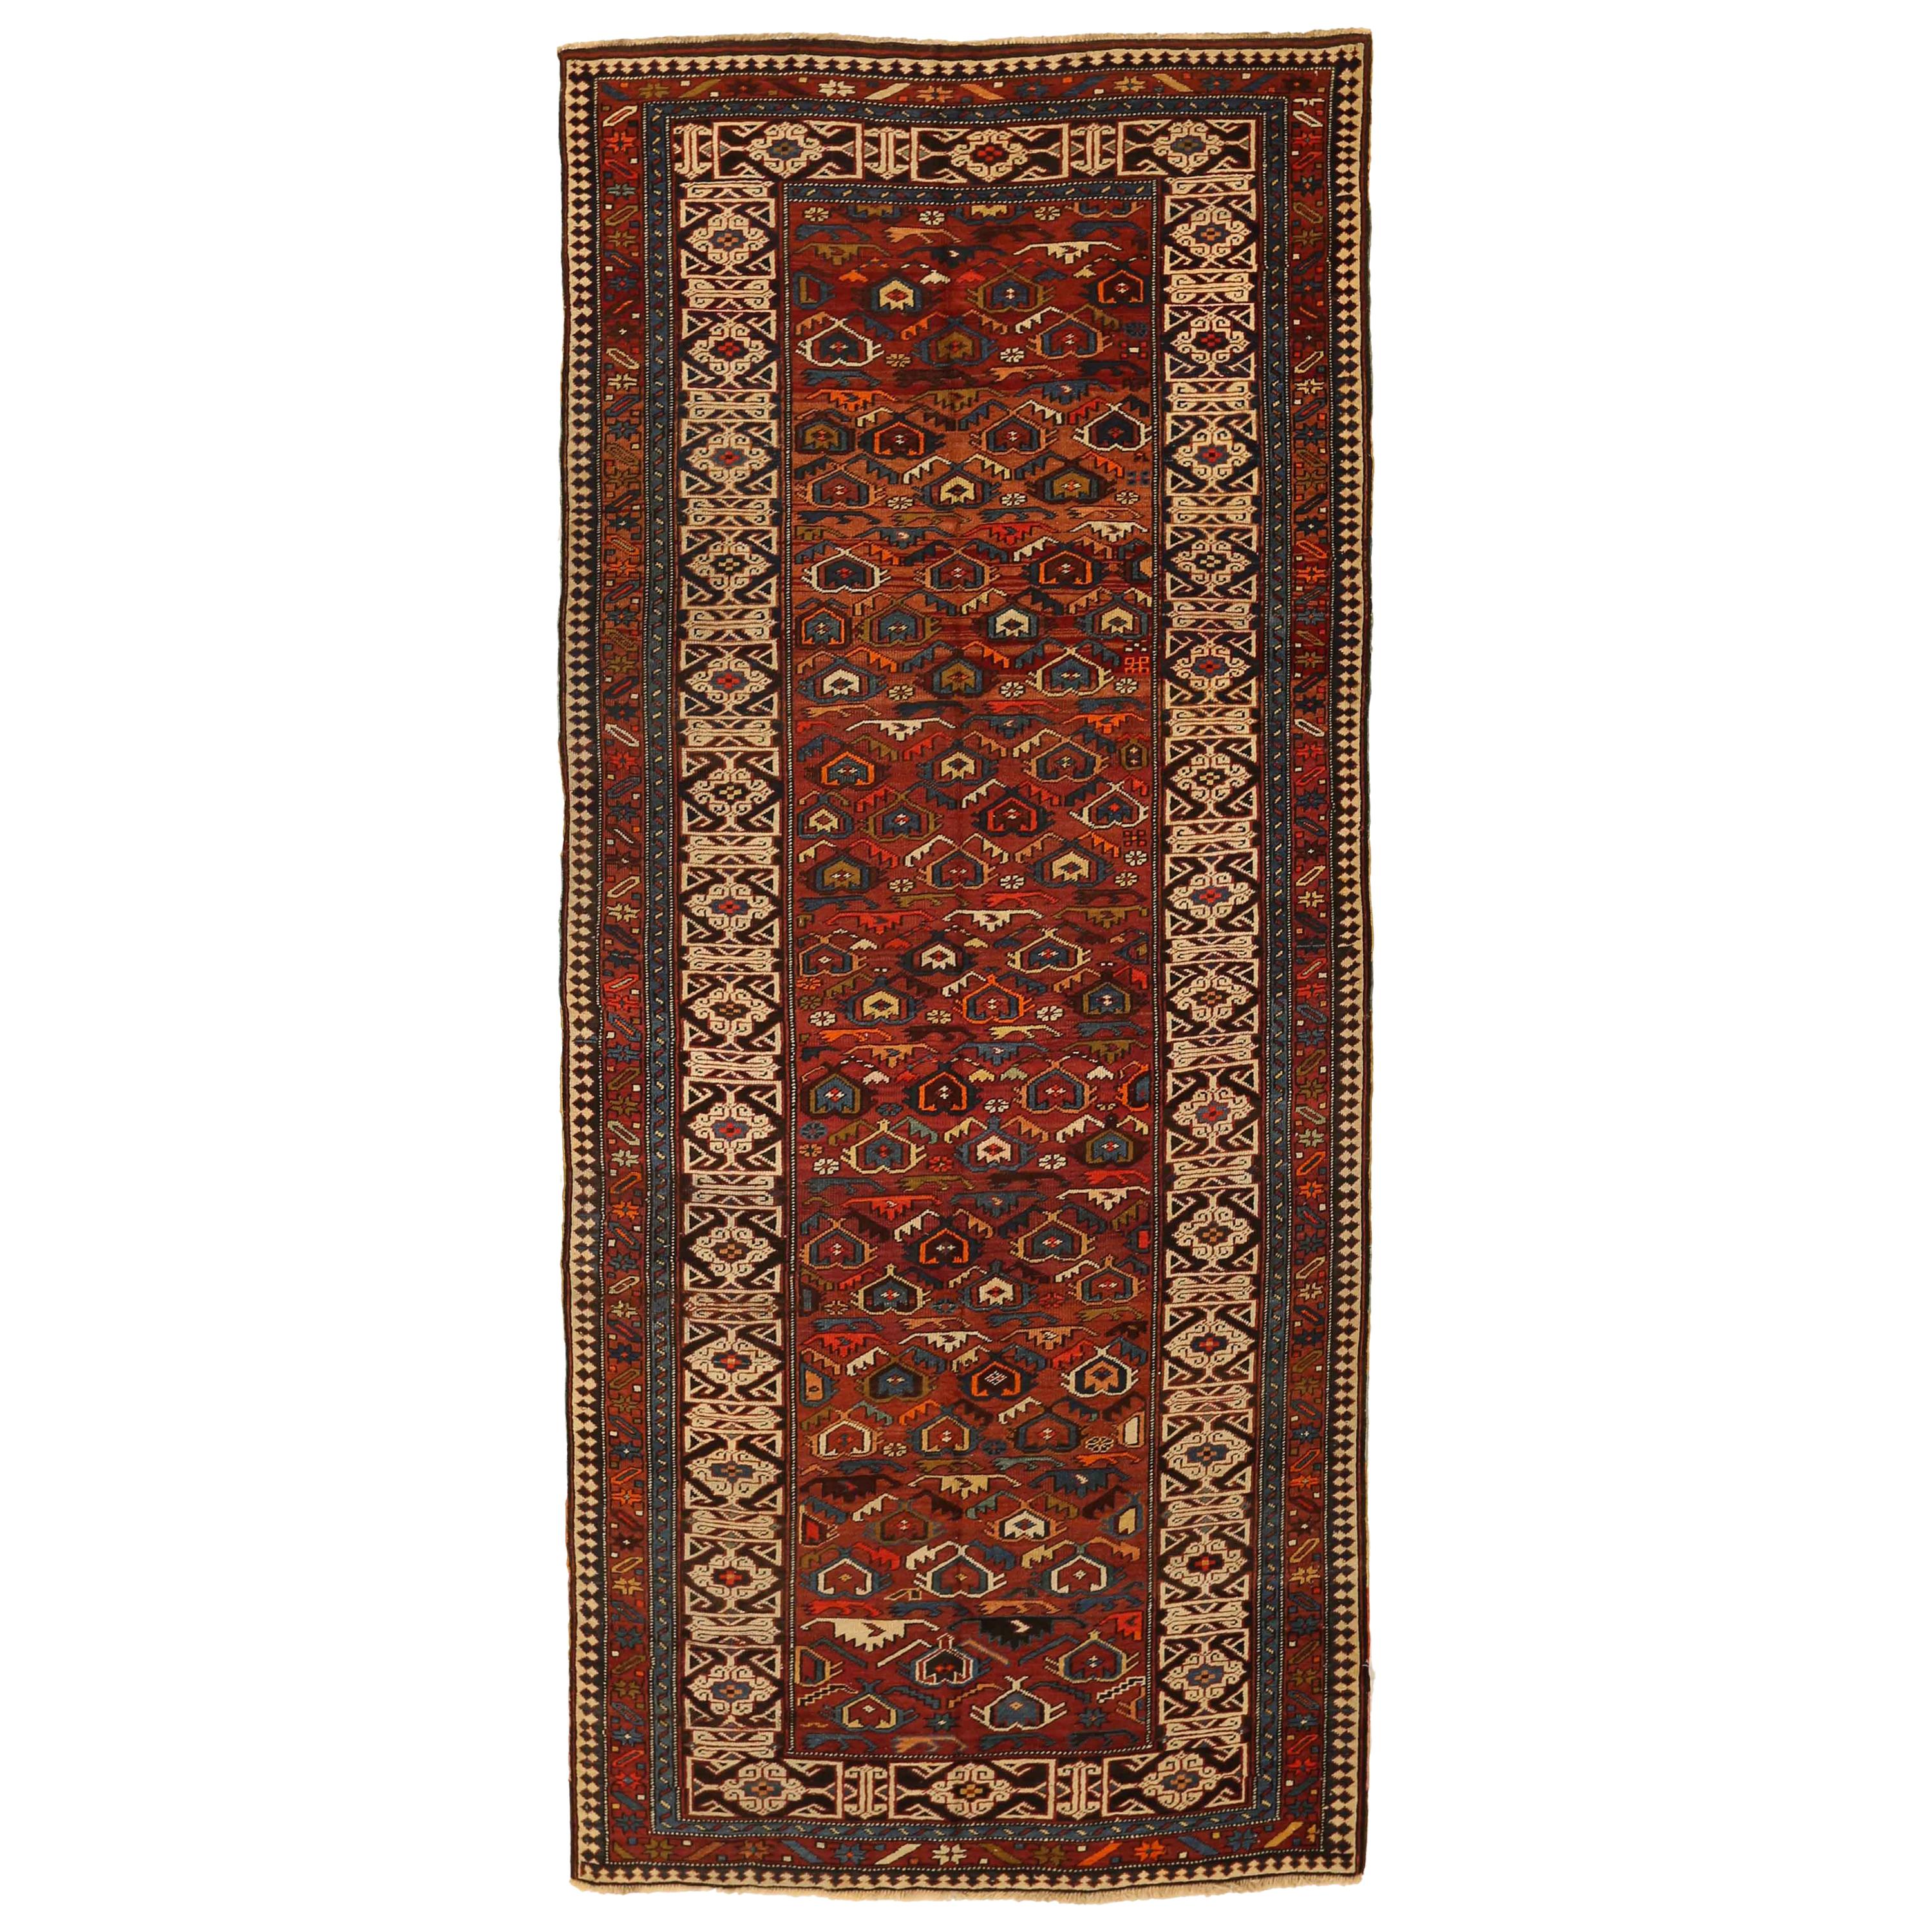 Antique Persian Rug Shirvan Design with Dainty Heart-Shaped Patterns, circa 1930 For Sale